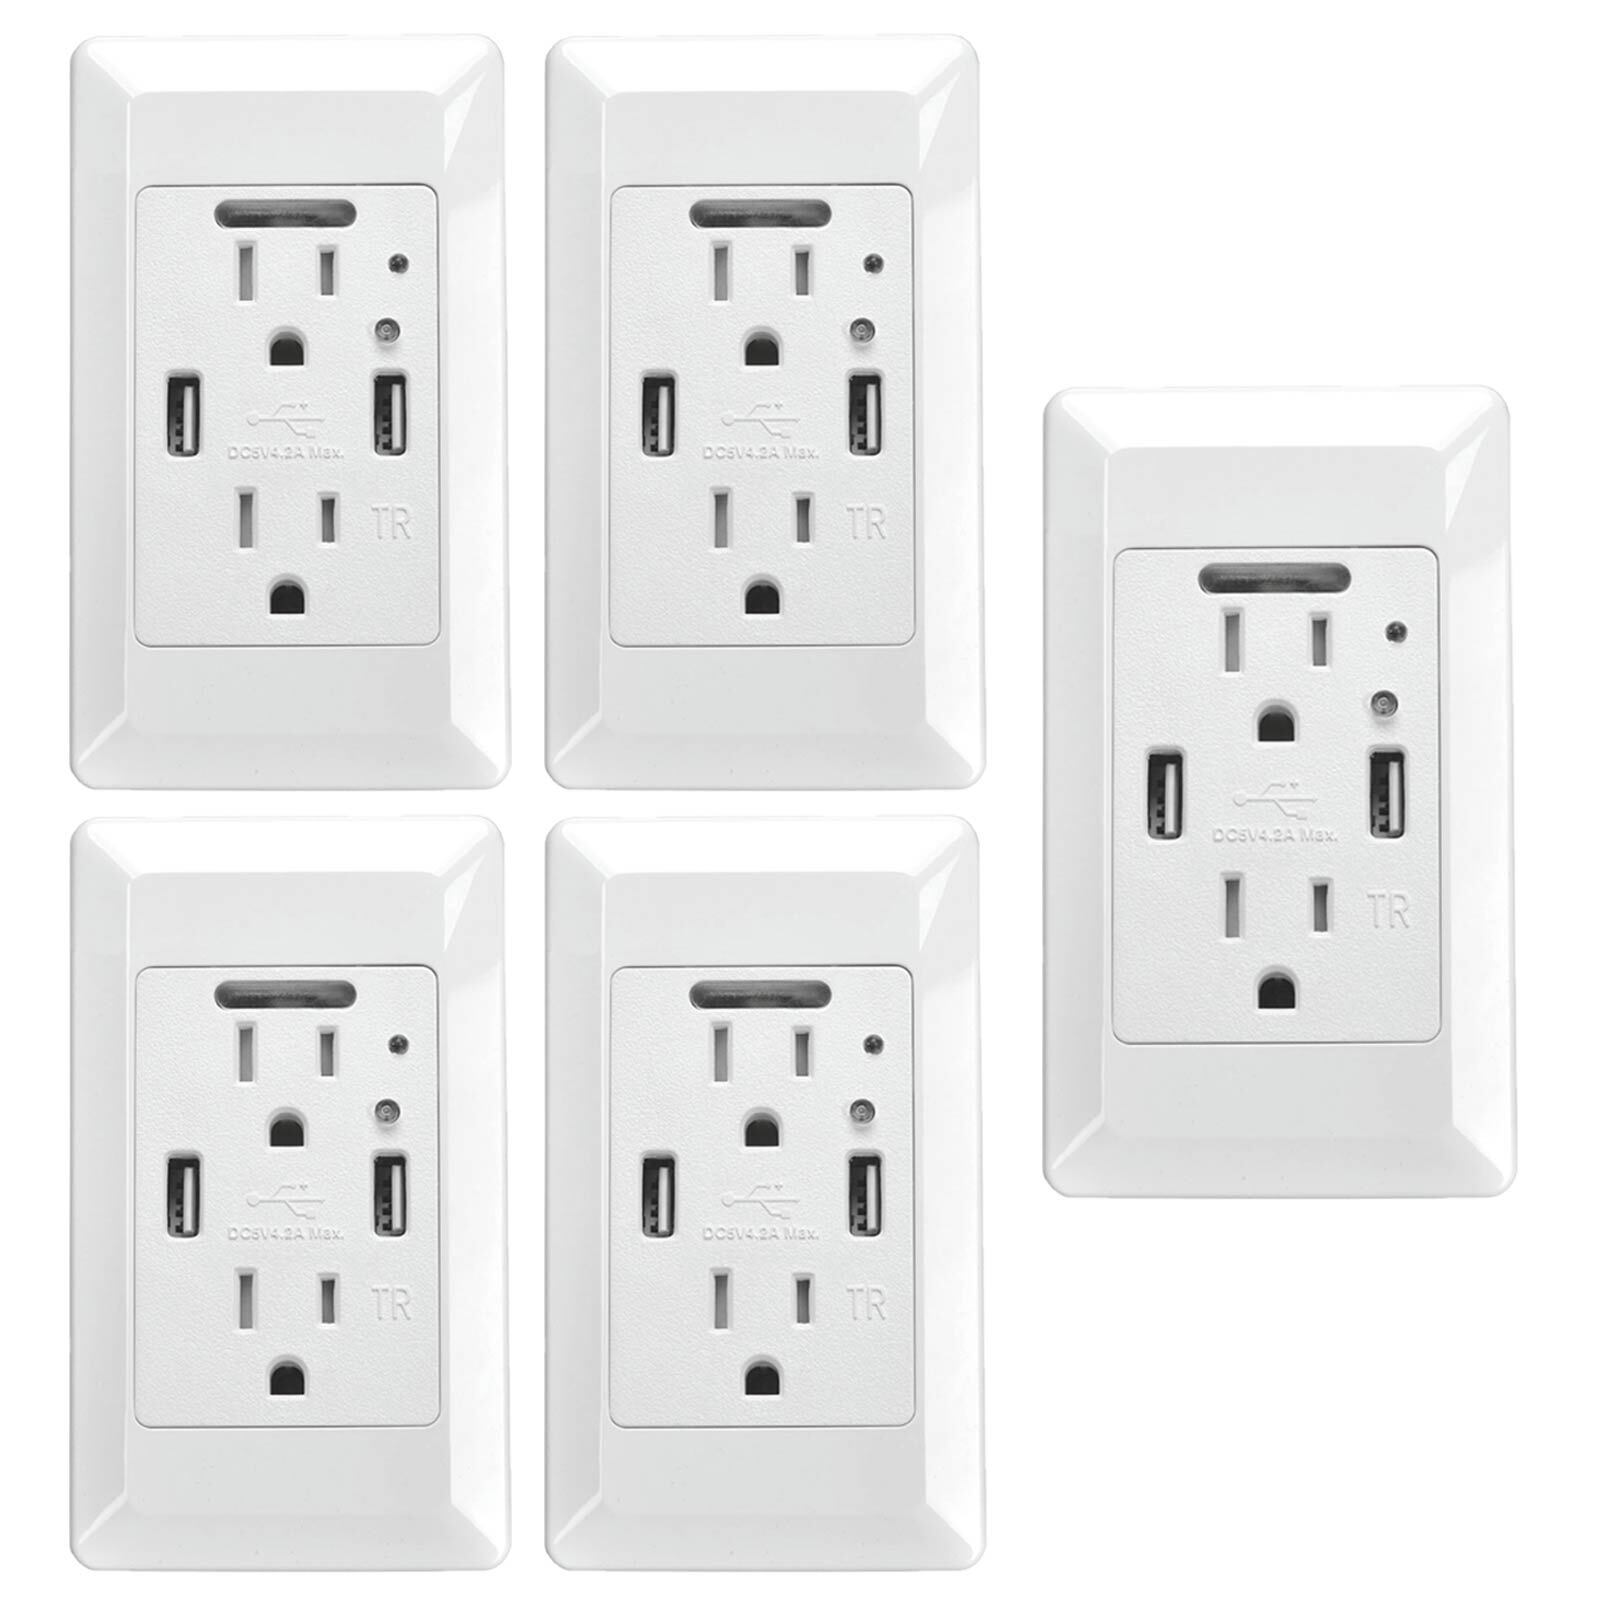 Night Duplex Wall Outlet Dual USB Receptacle with LED Night Lights w/Cover Plate